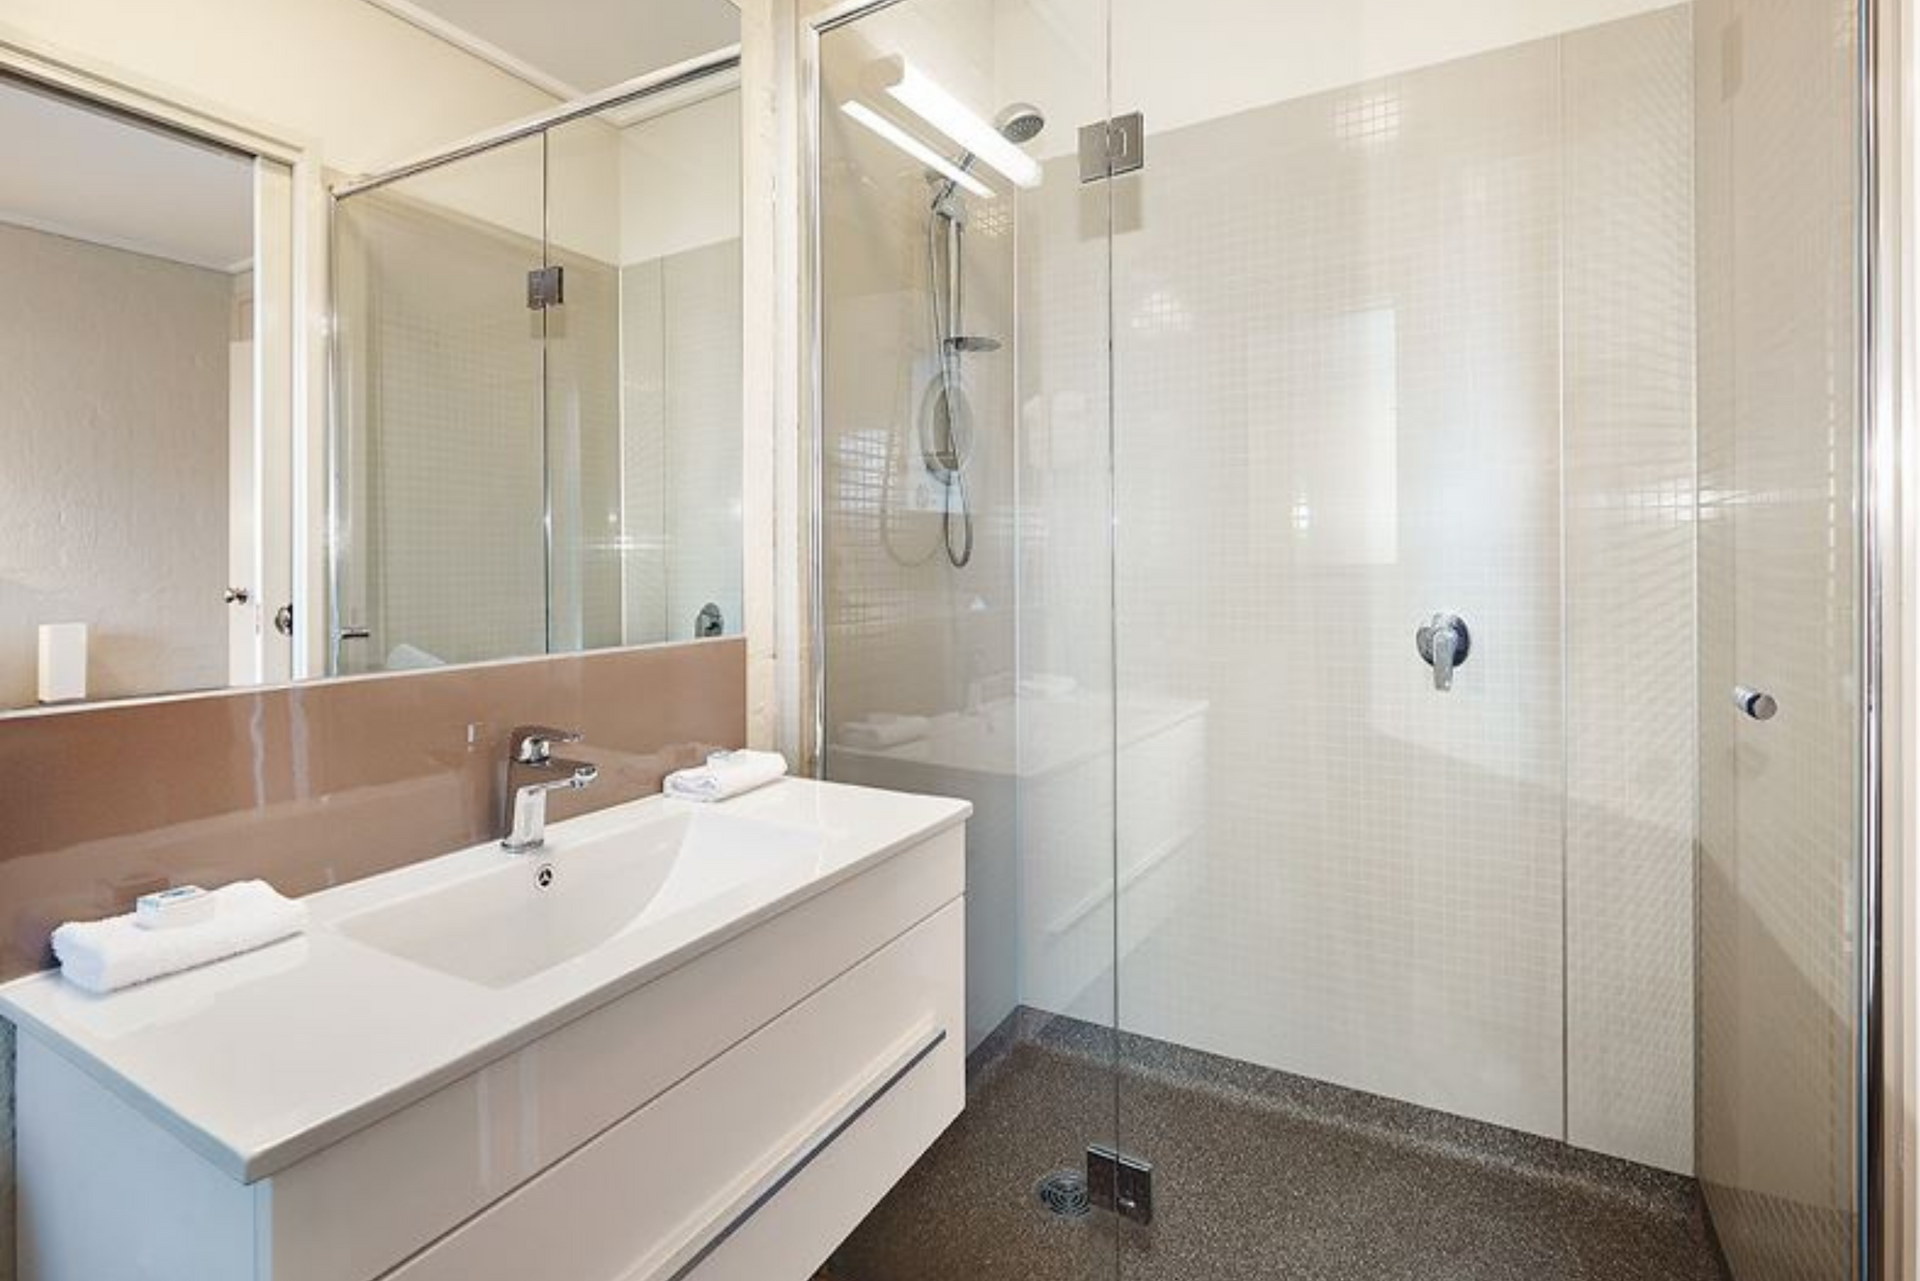 A bathroom with a sink , mirror and walk in shower.